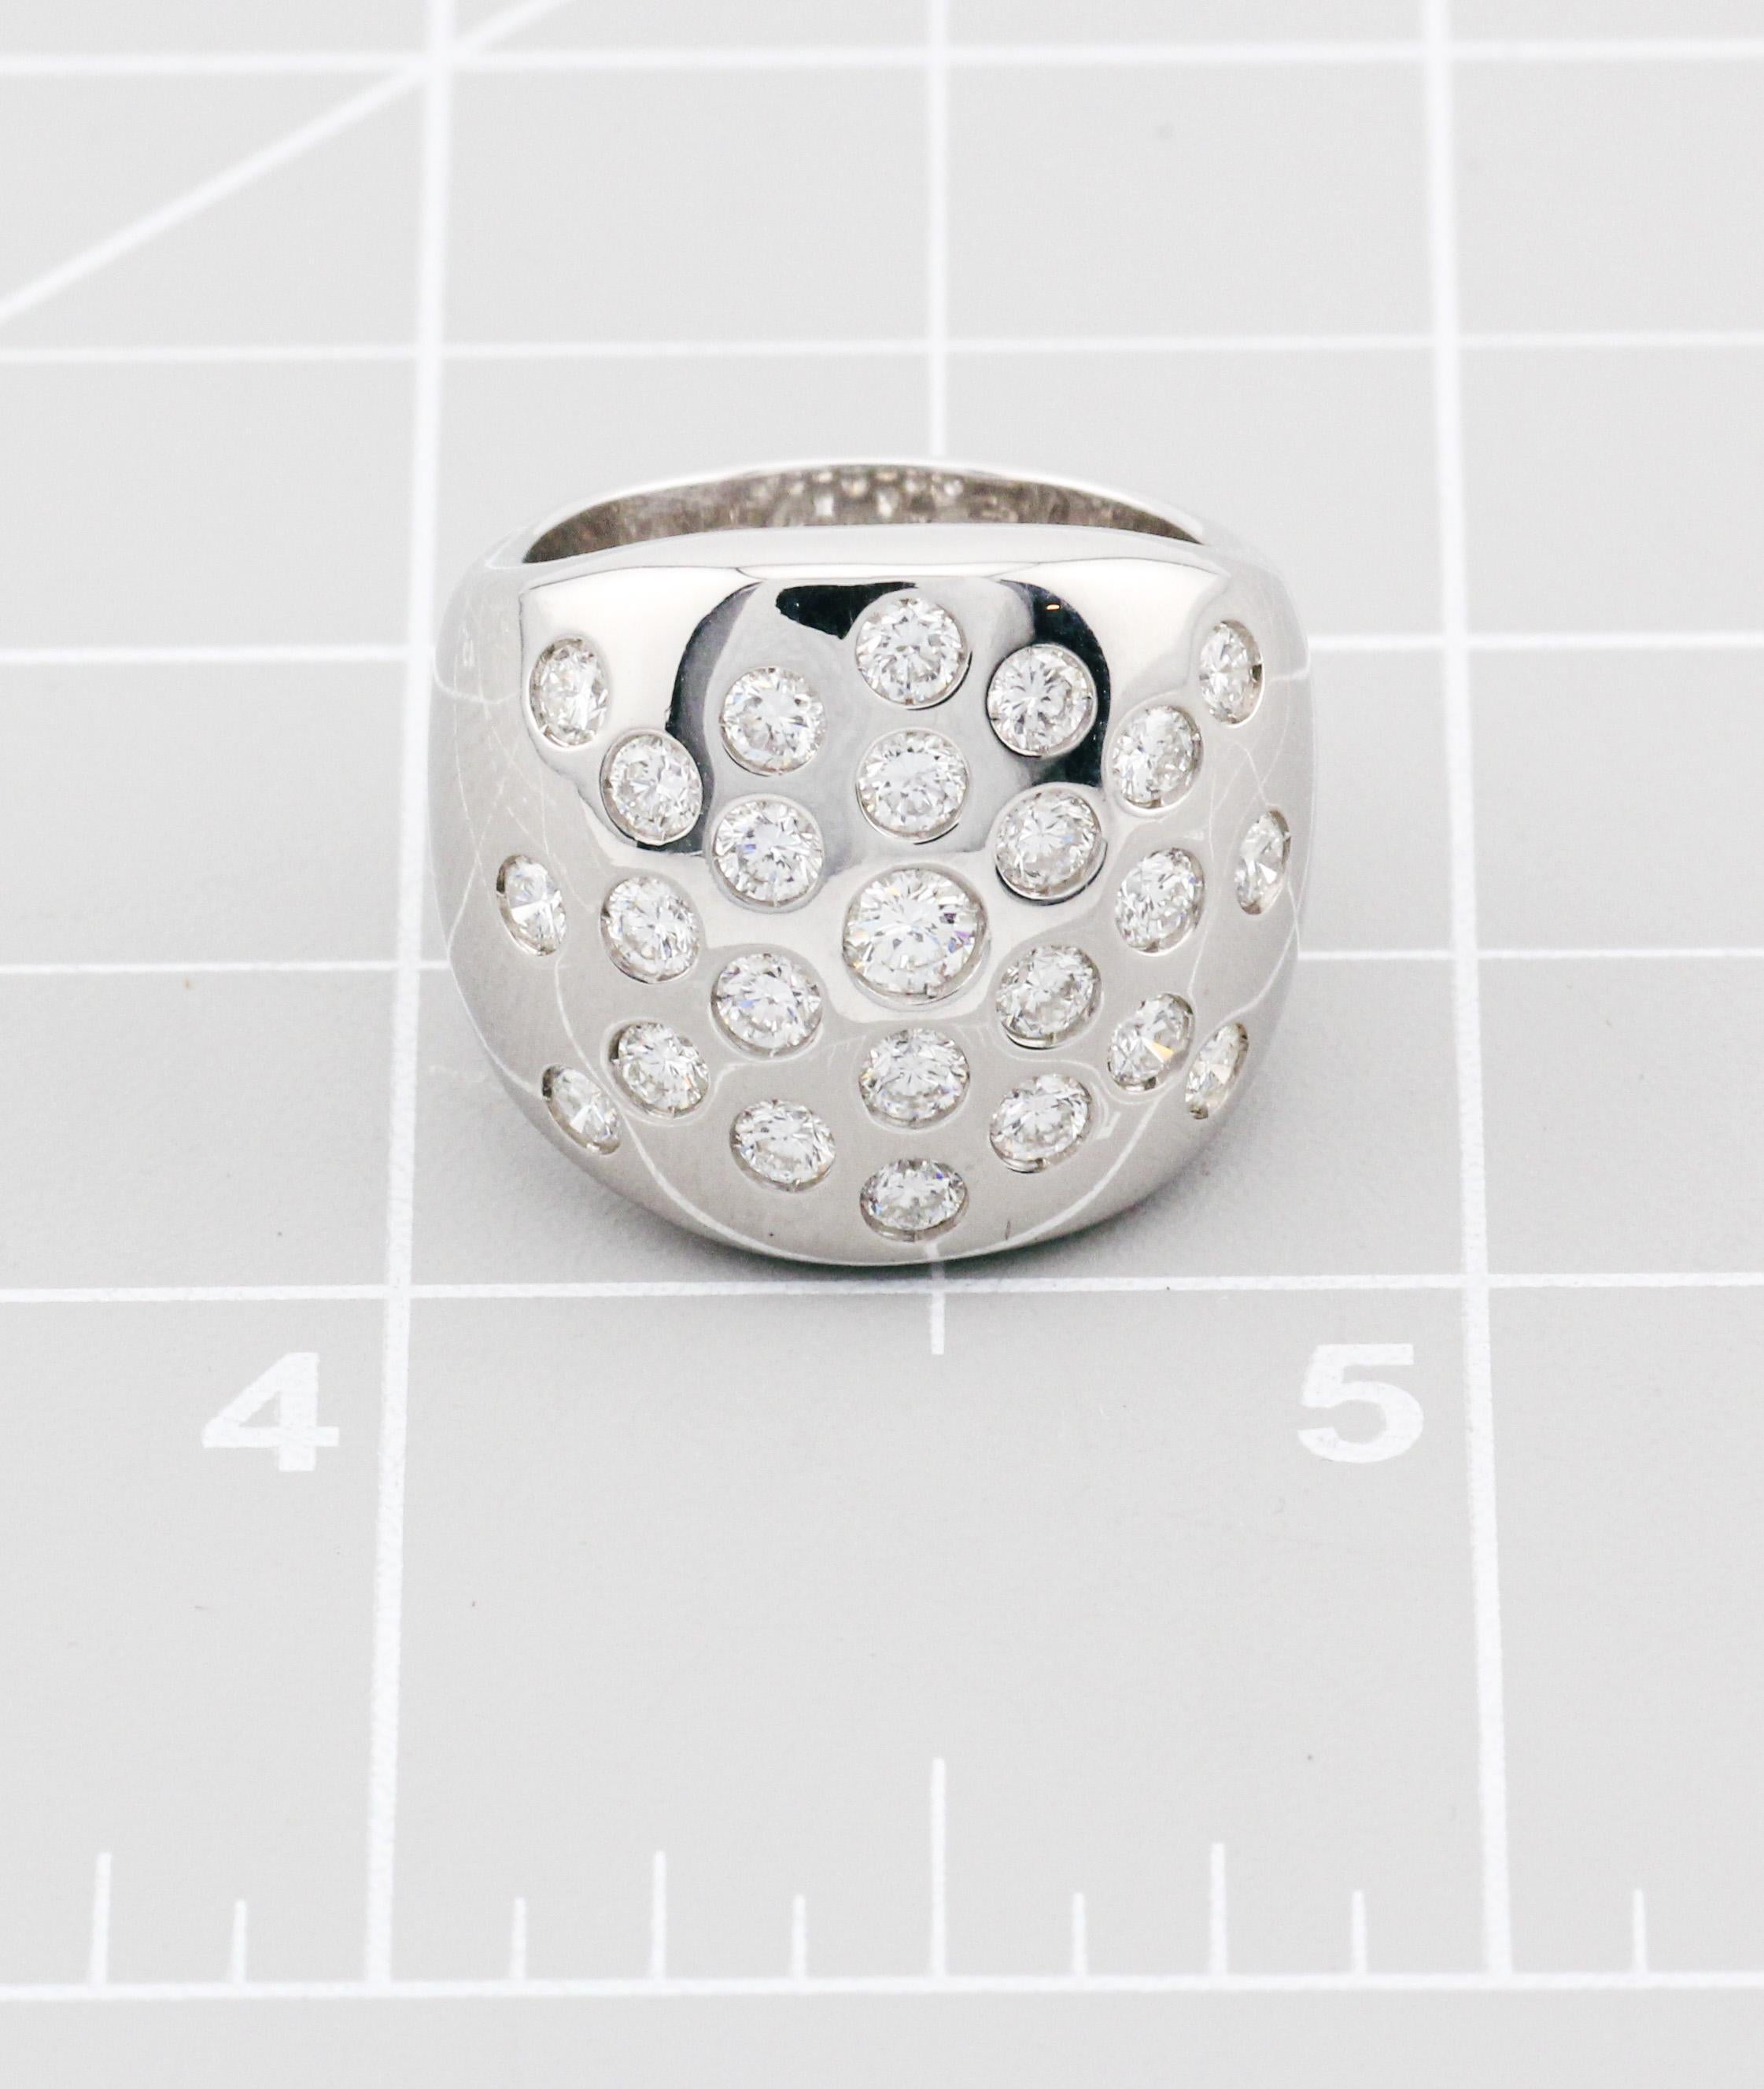 Hermes 1.45 Carat Diamond 18K White Gold Dome Ring Size 6 For Sale 7